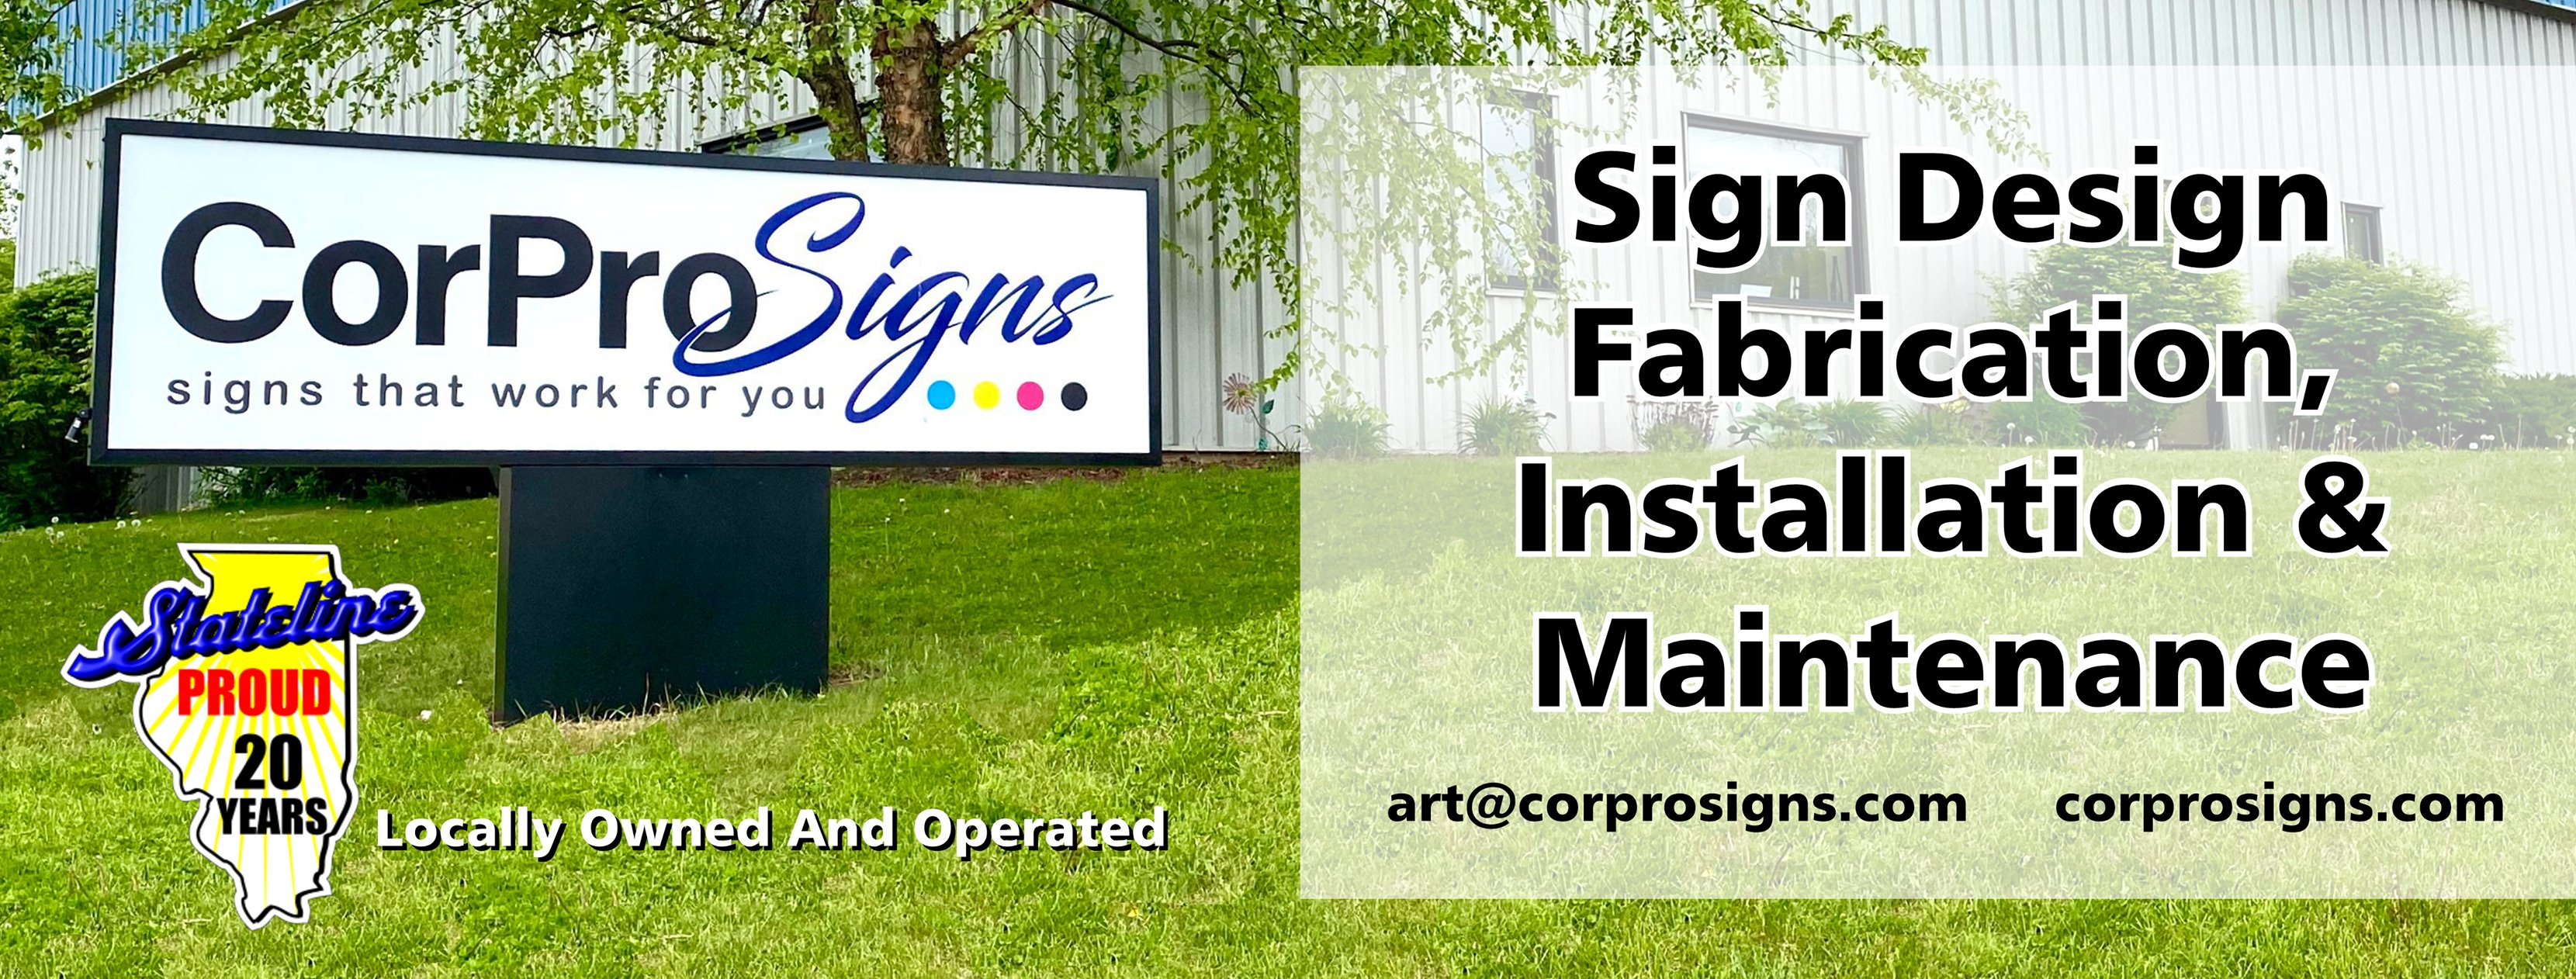 sign Design
Fabrication,
Installation &amp;
Maintenance

art@corprosigns.com corprosigns.com

Cor ProS js

signs that work for you